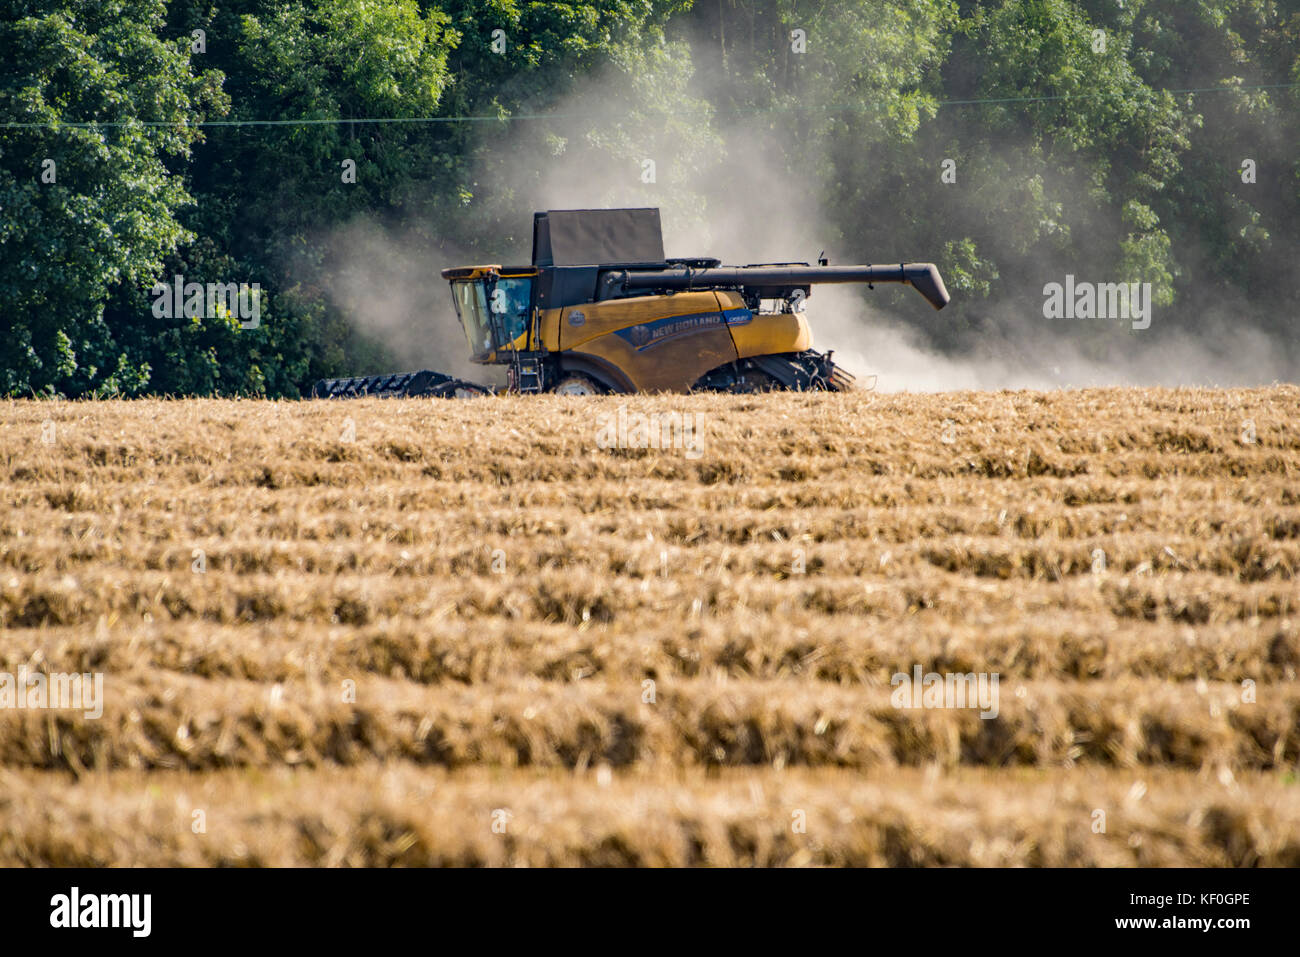 Combine harvesting, Chedwoth, Gloucestershire. Stock Photo